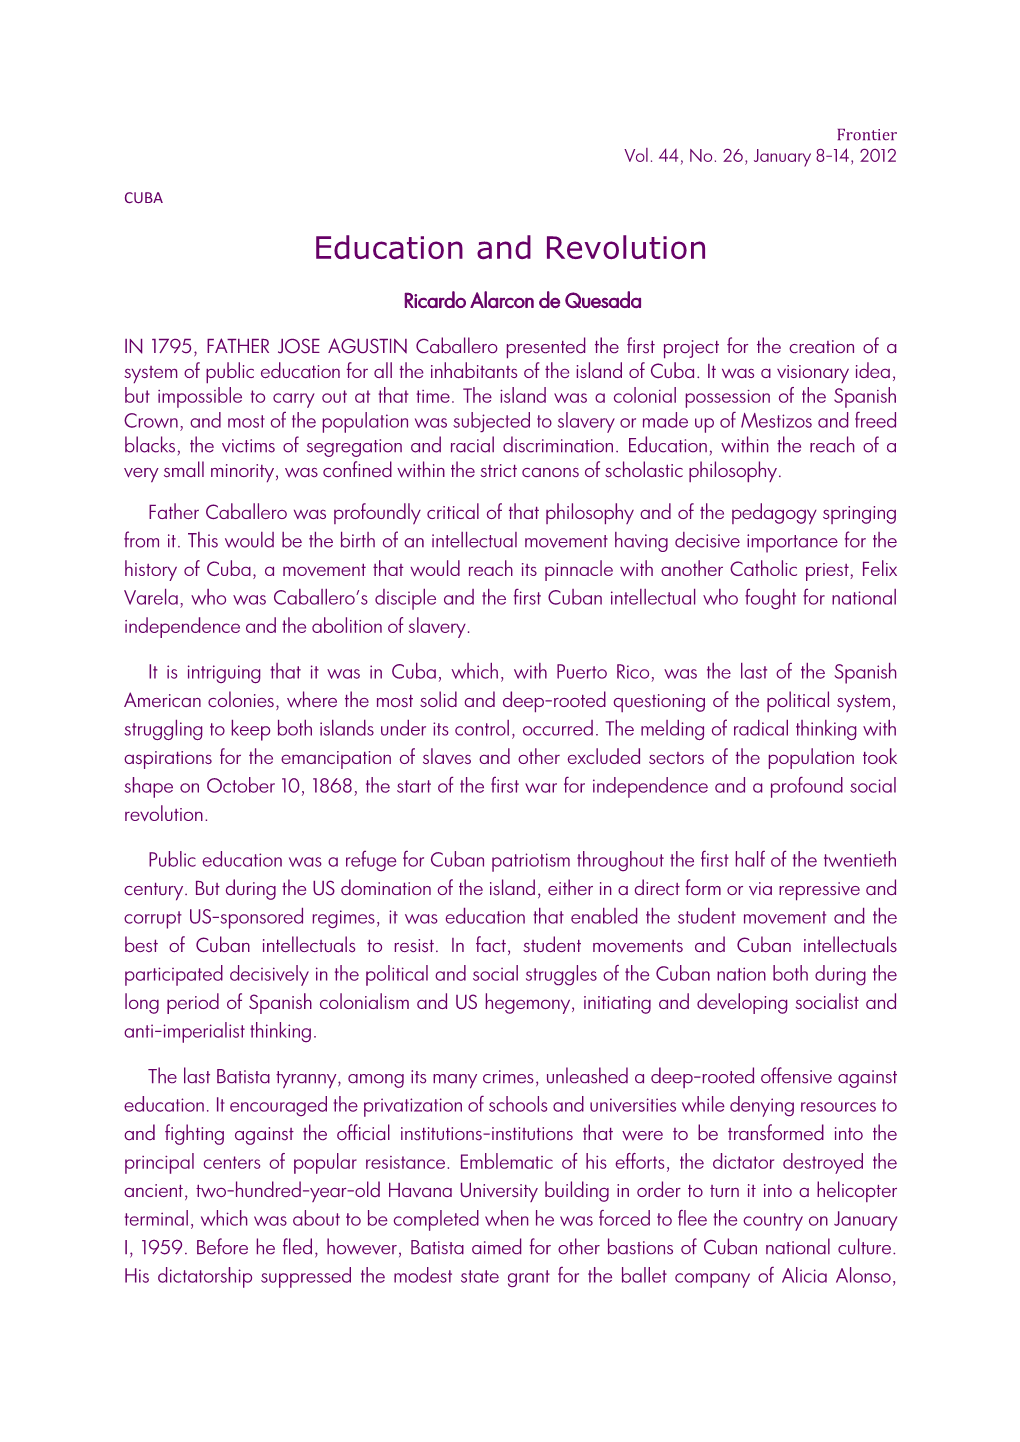 Education and Revolution